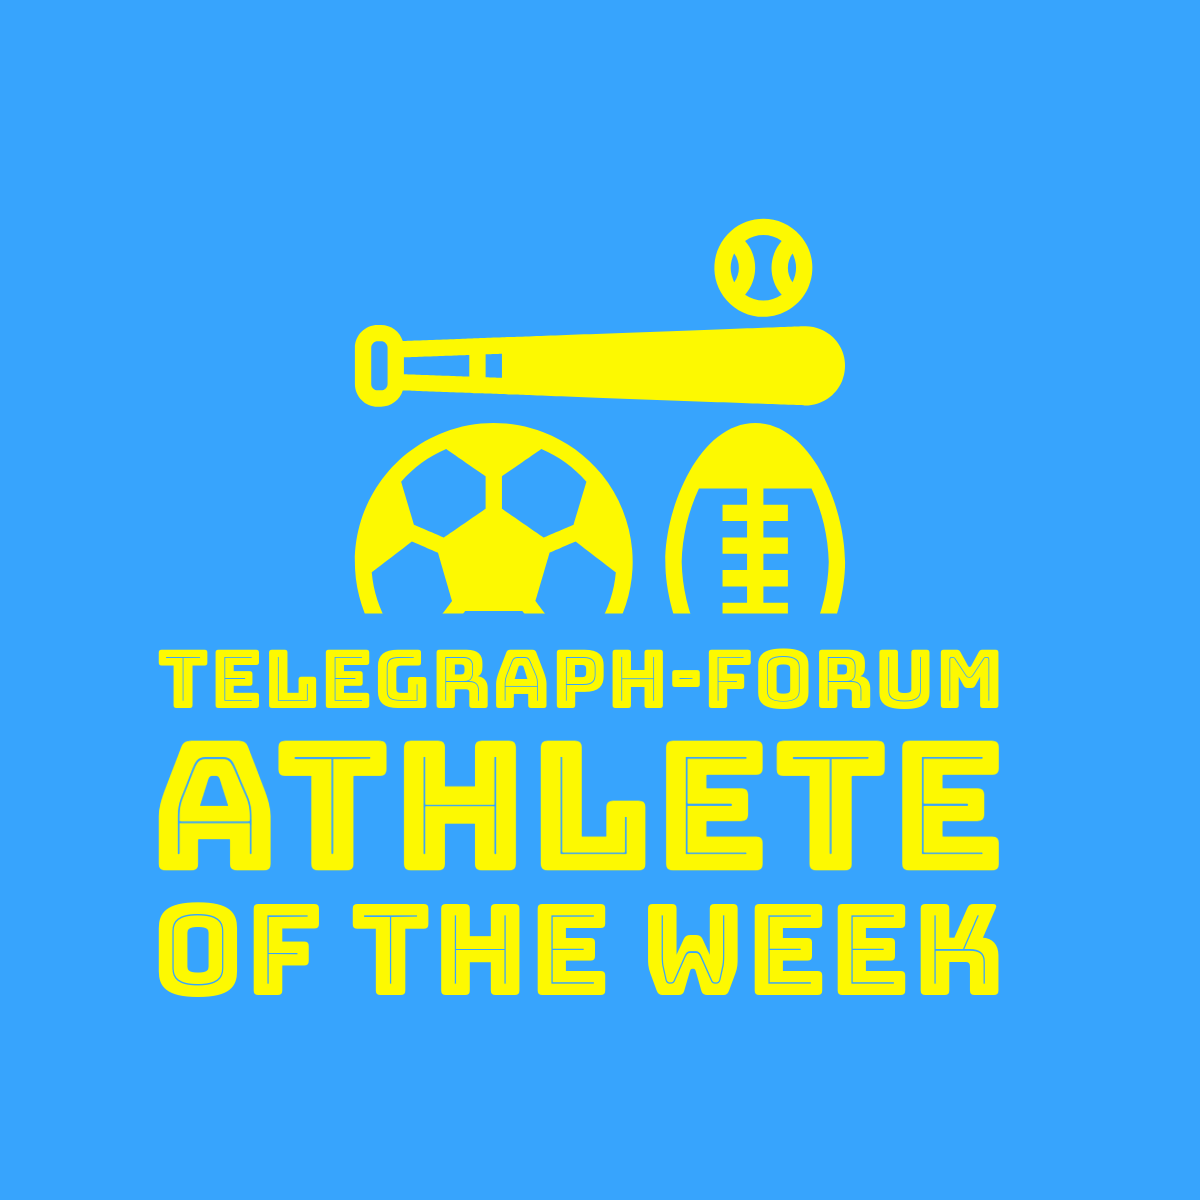 Make your vote count in the Telegraph-Forum Athlete of the Week poll!